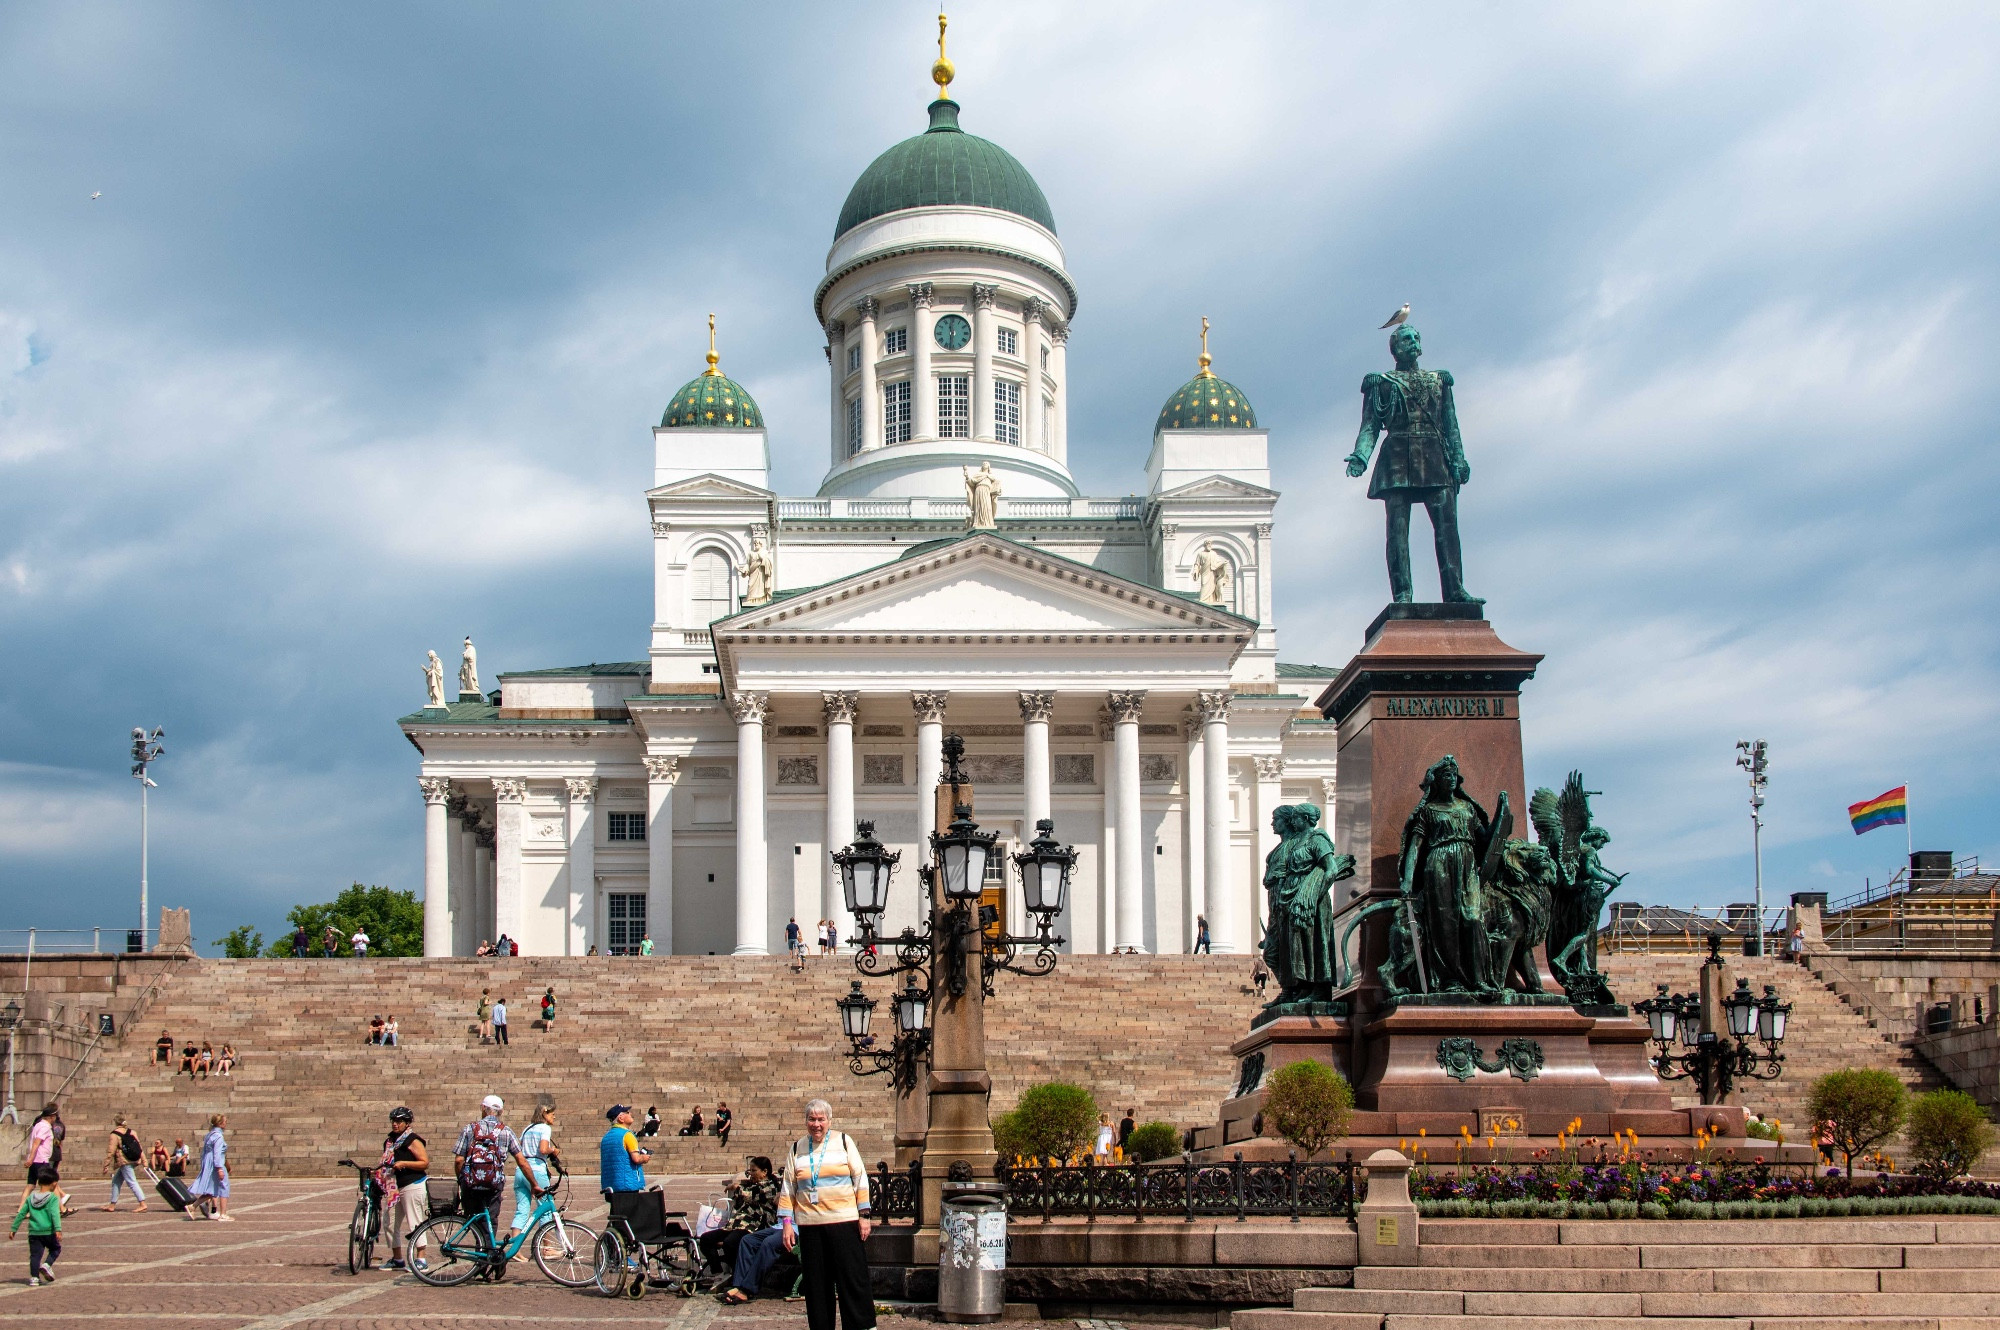 Senate Square with Helsinki Cathedral and Statue of Alexander II, Helsinki, Finland